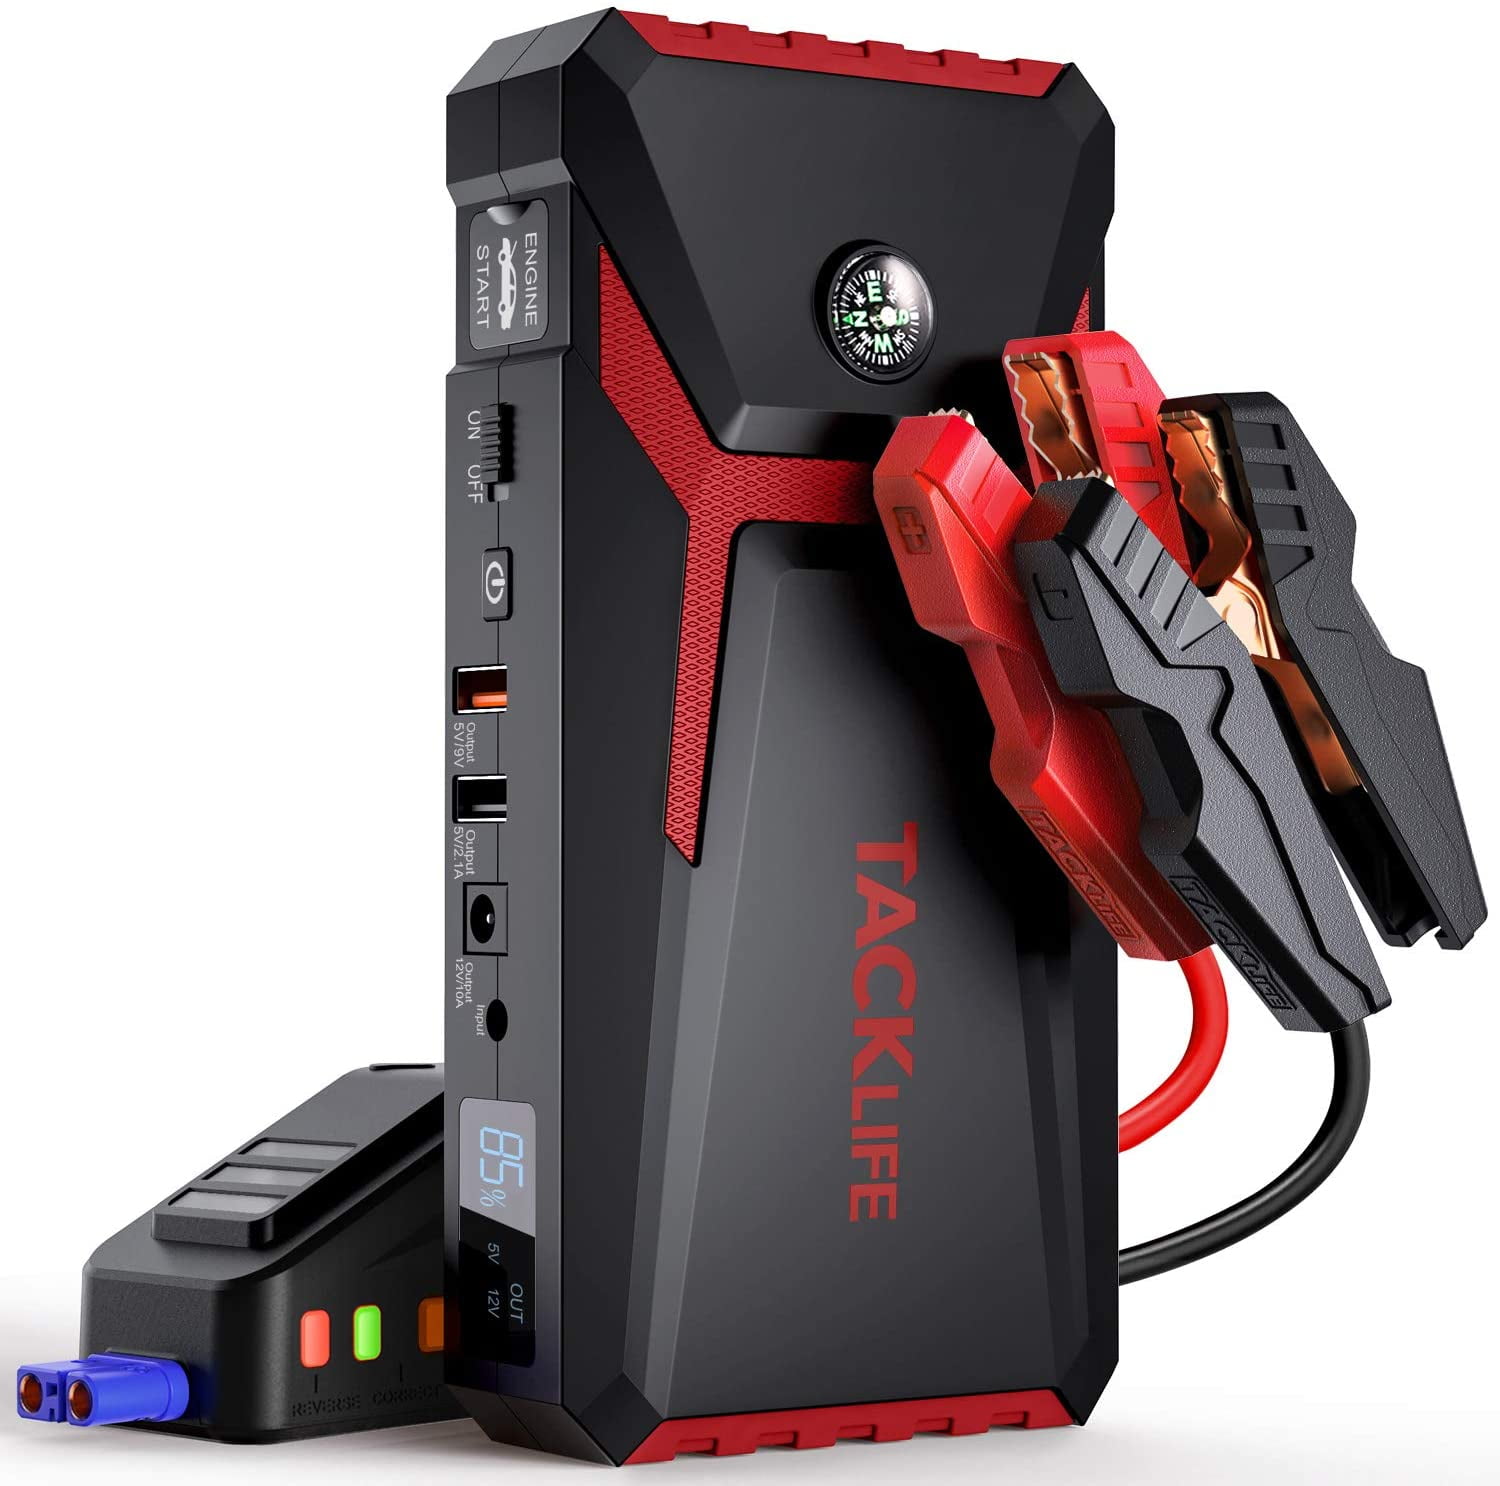 Tacklife 800A Peak 18000mAh Car Jump Starter (Up to 7.0L Gas, 5.5L Diesel Engine), 12V Auto Battery Booster | T8 Yellow